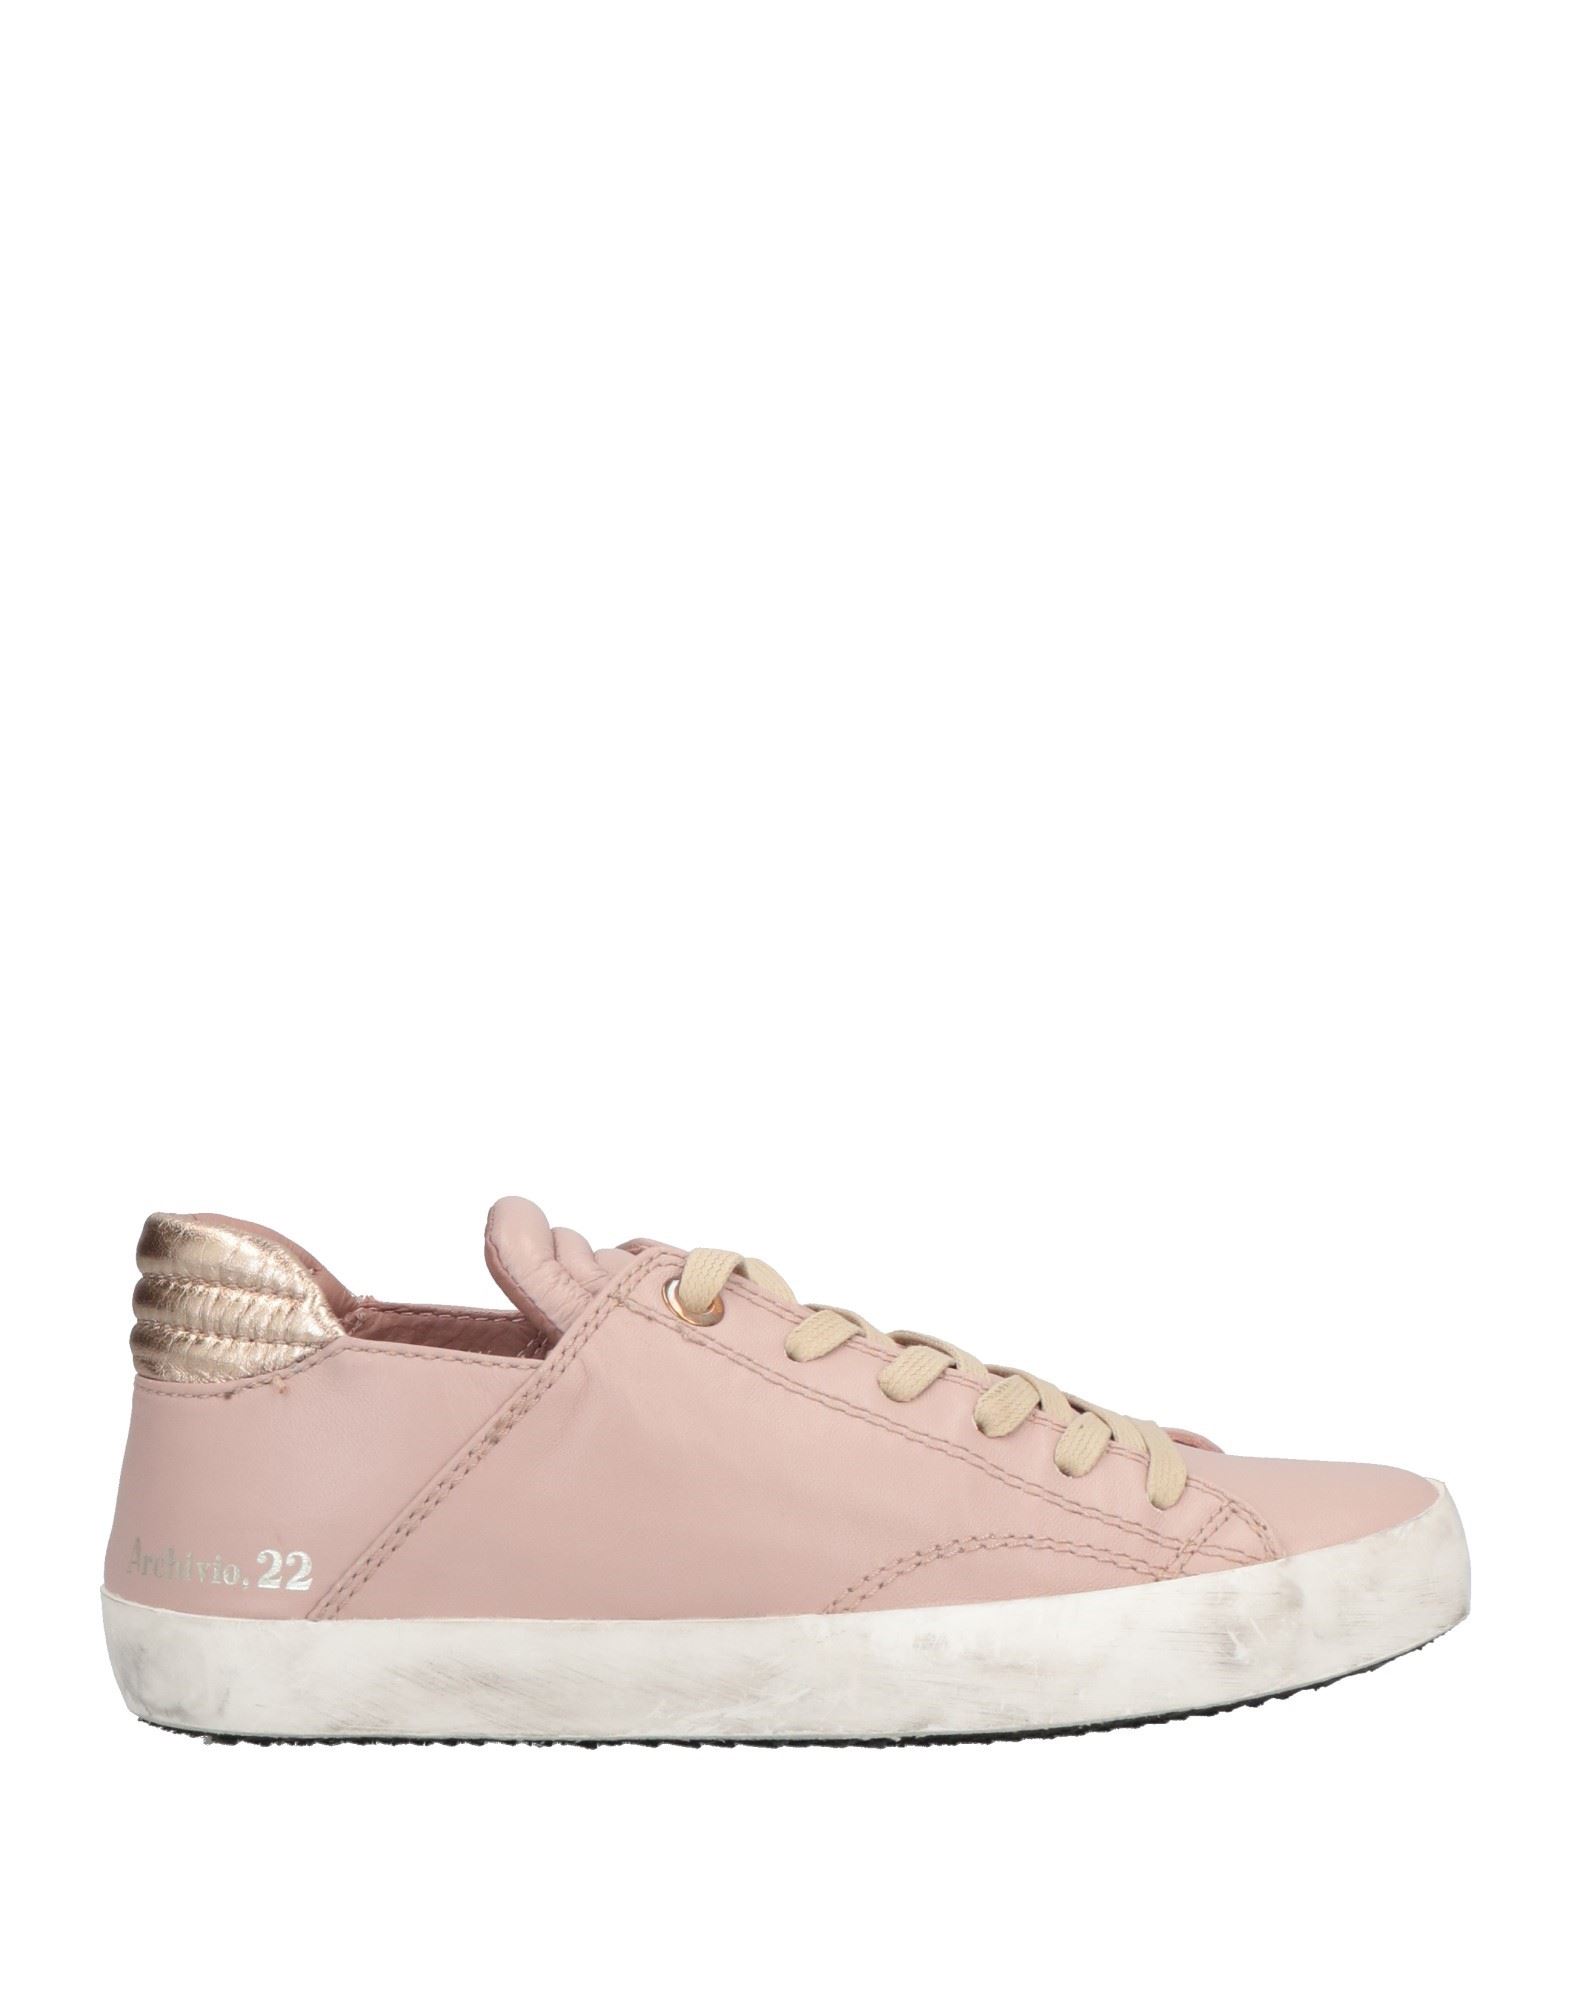 Archivio,22 Sneakers In Pink